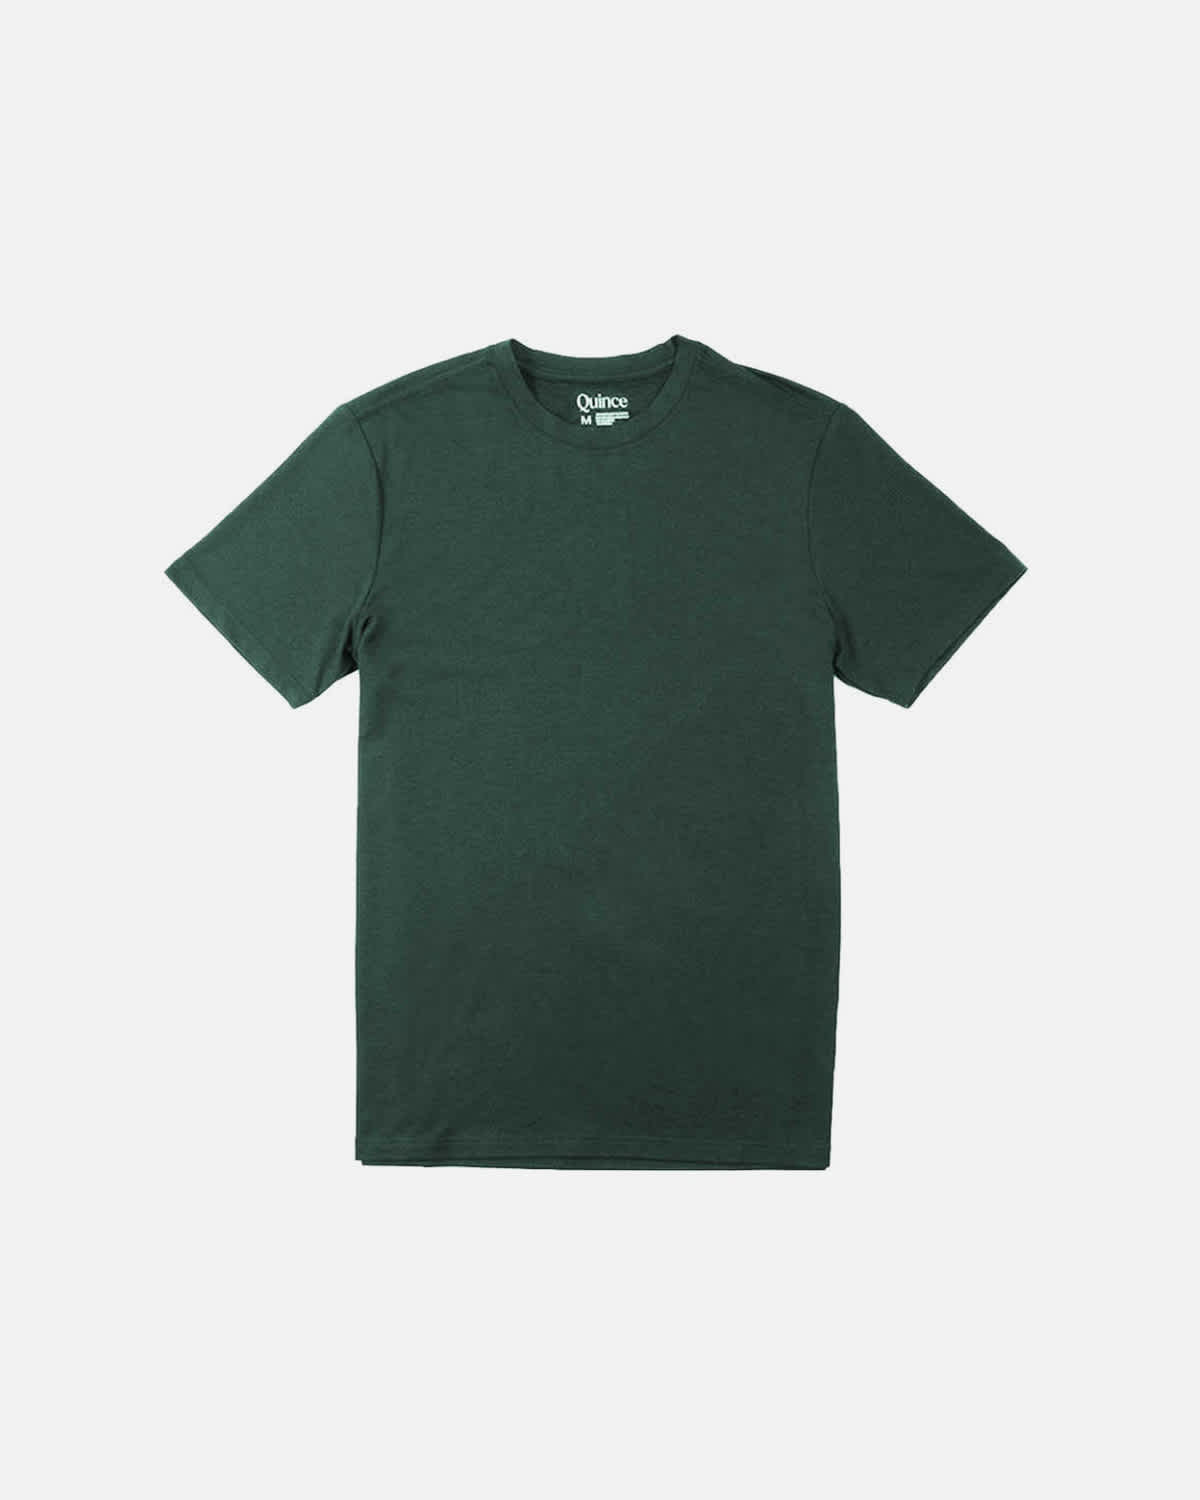 Flowknit Ultra-Soft Performance Tee - Olive - 3